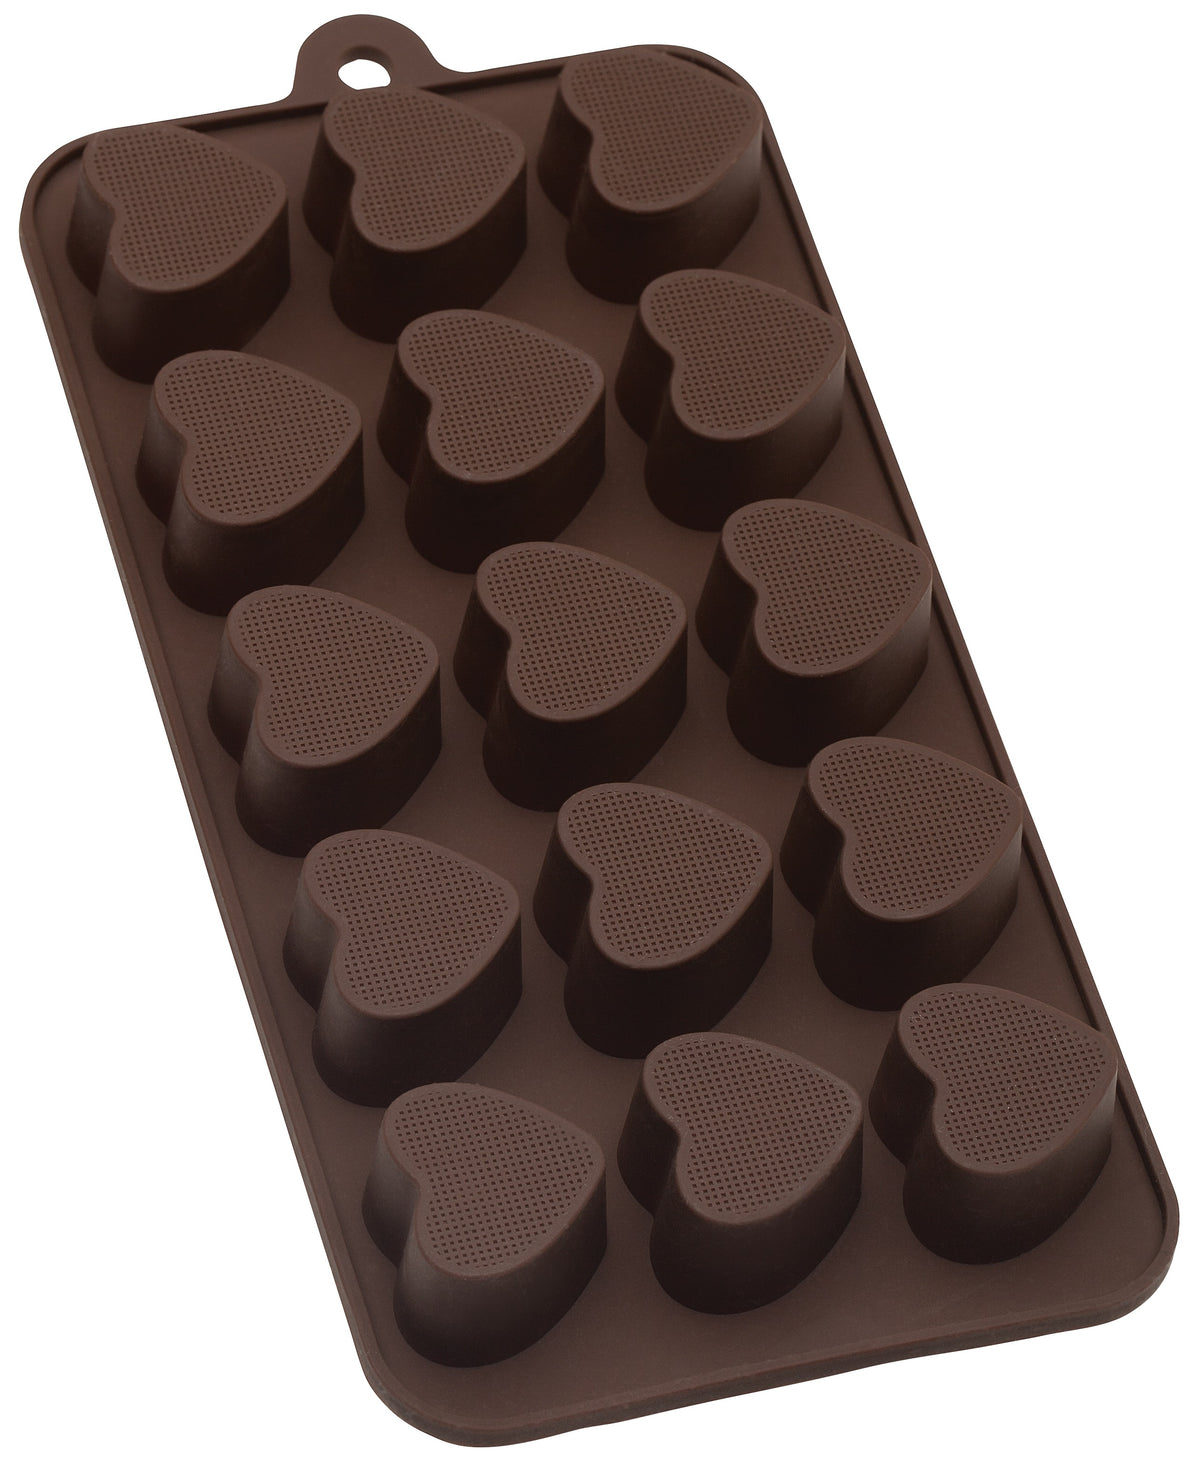 Mrs. Anderson's 43749 Heart Chocolate Mold, Brown